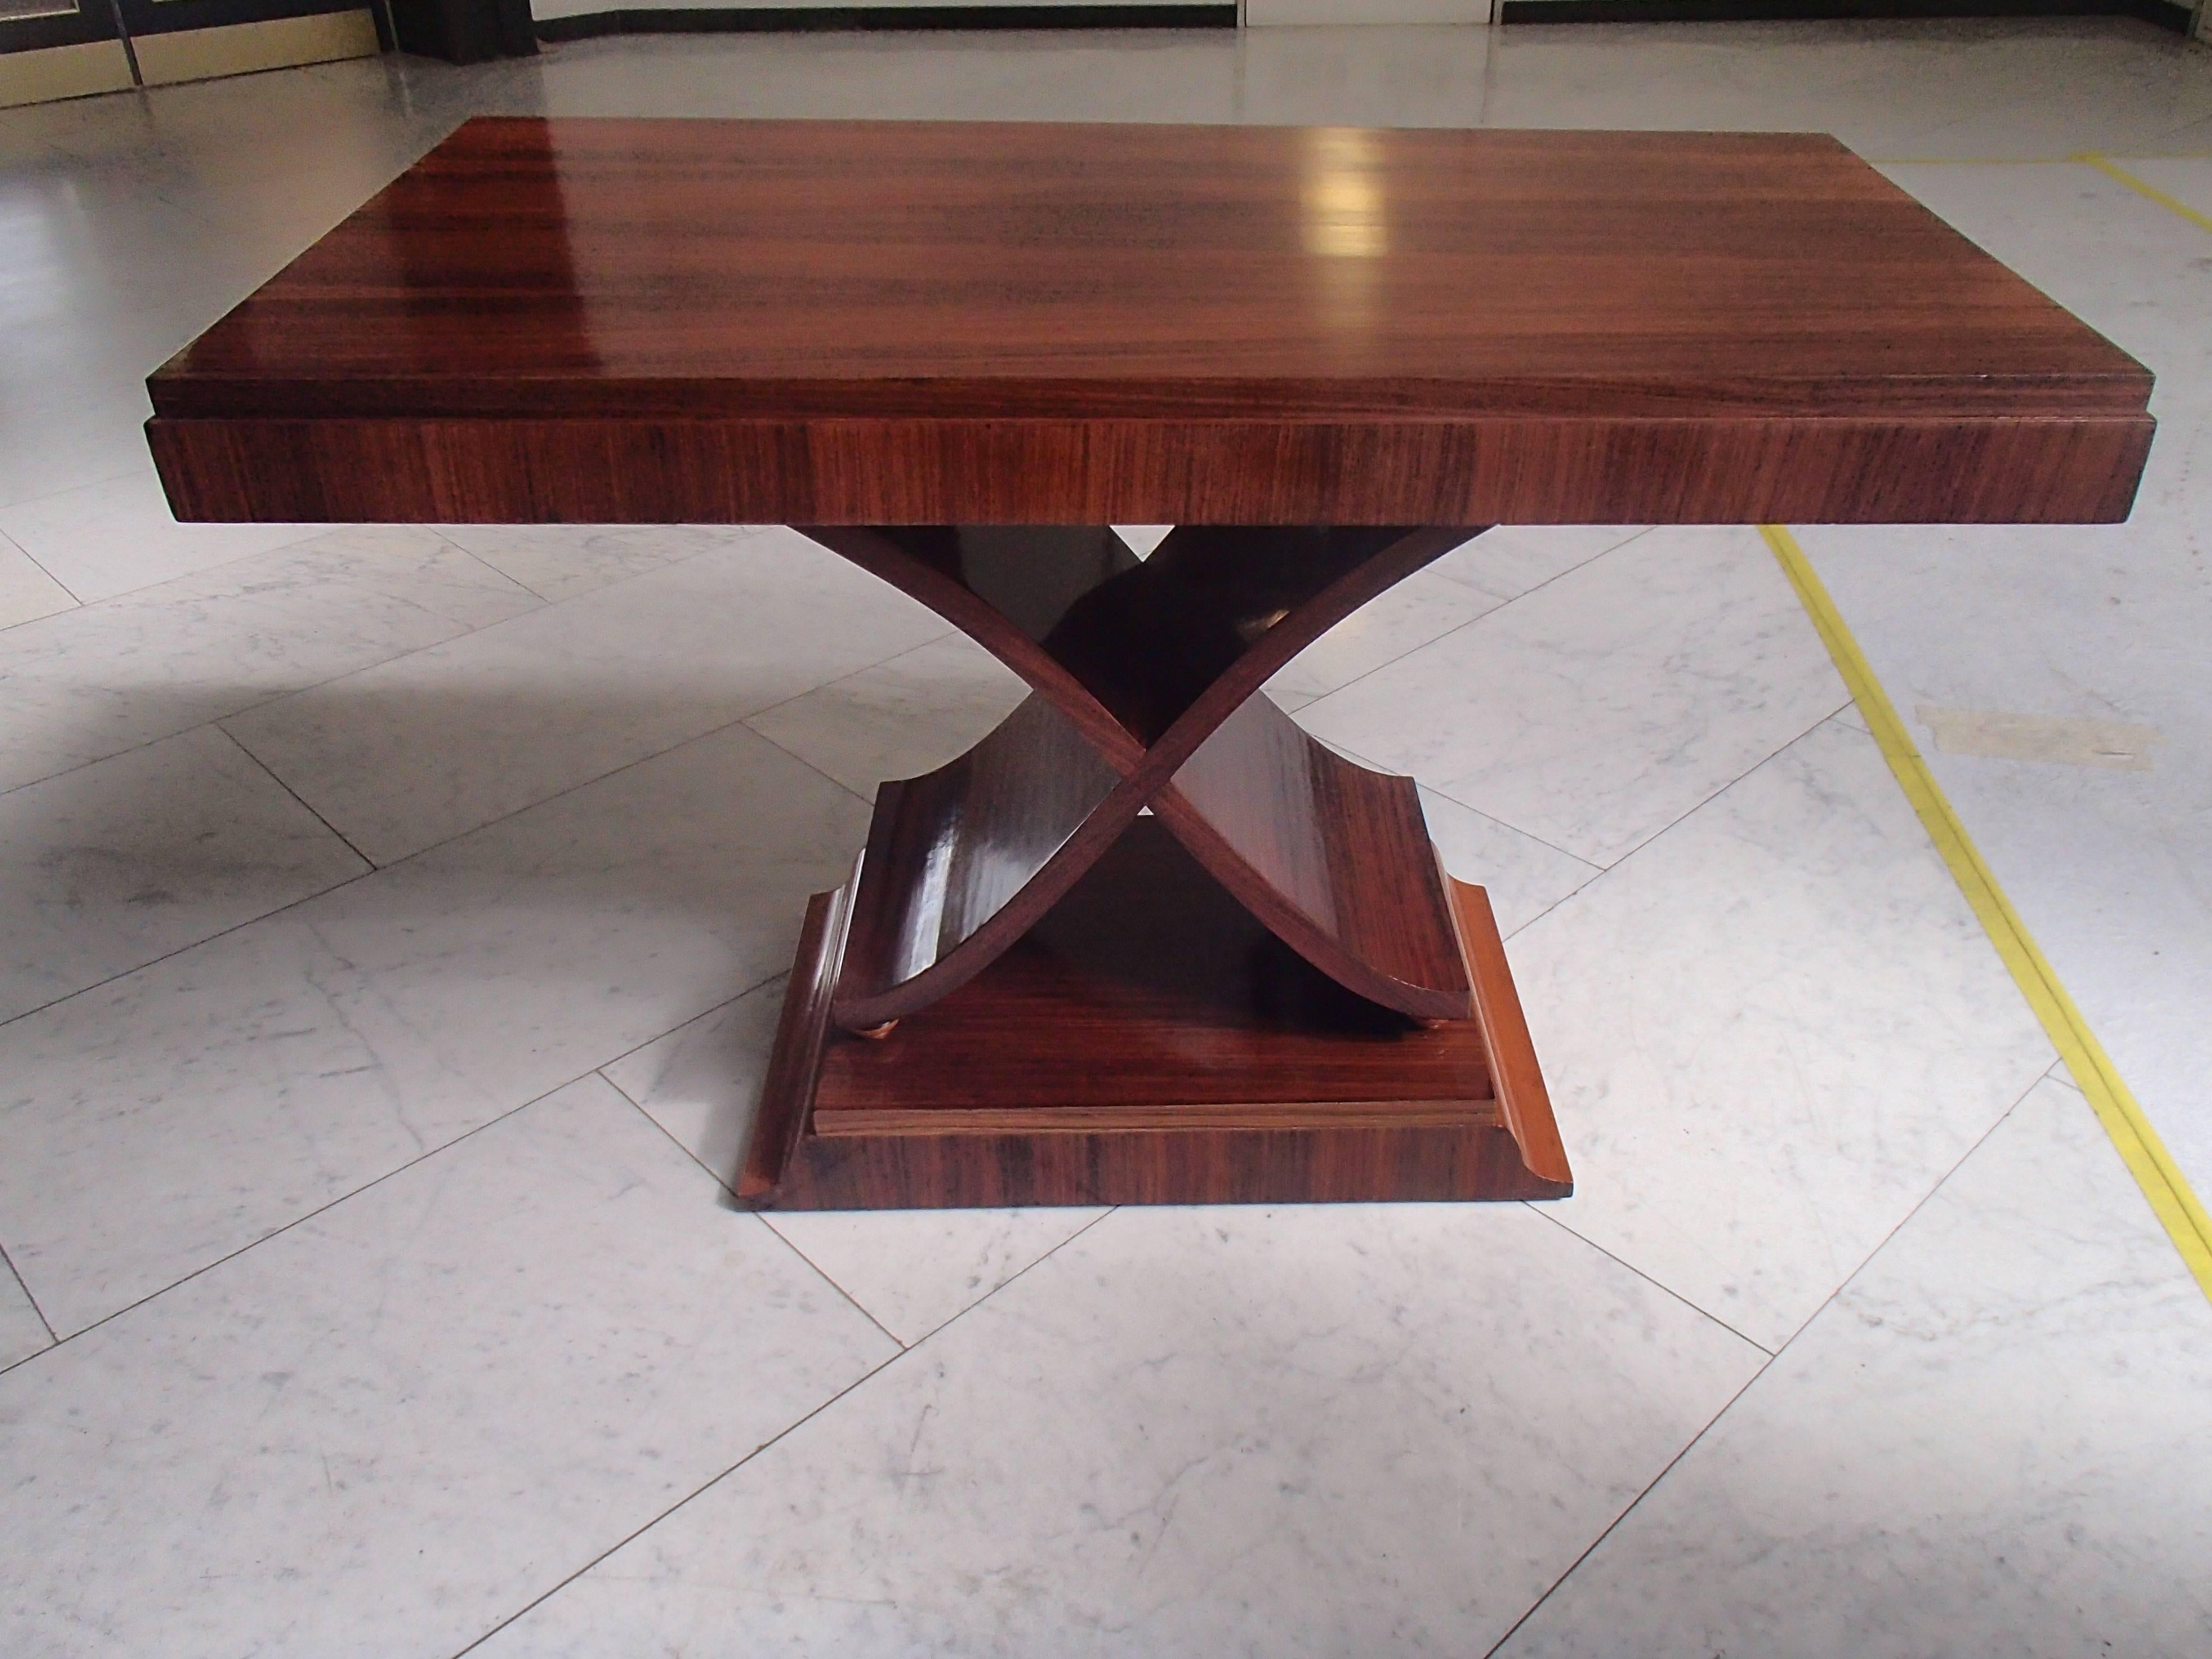 Large rosewood console, side table with a beautiful X-shaped leg standing on four balls. The top is slightly unequal.